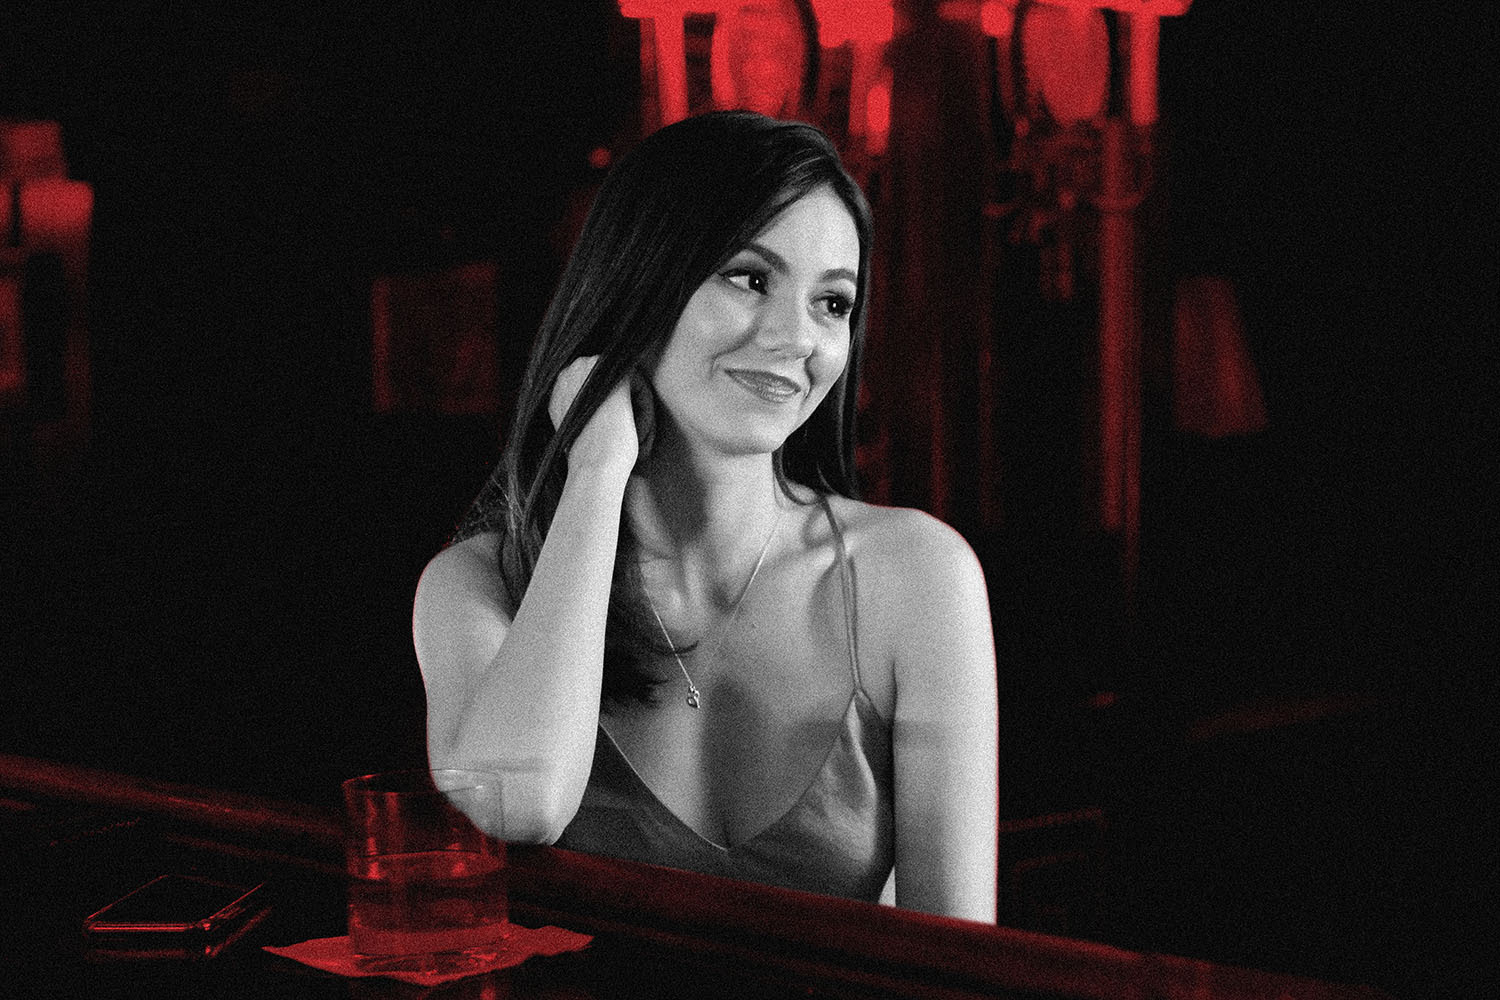 Victoria Justice stars as a Manhattan gallery owner in "Trust"